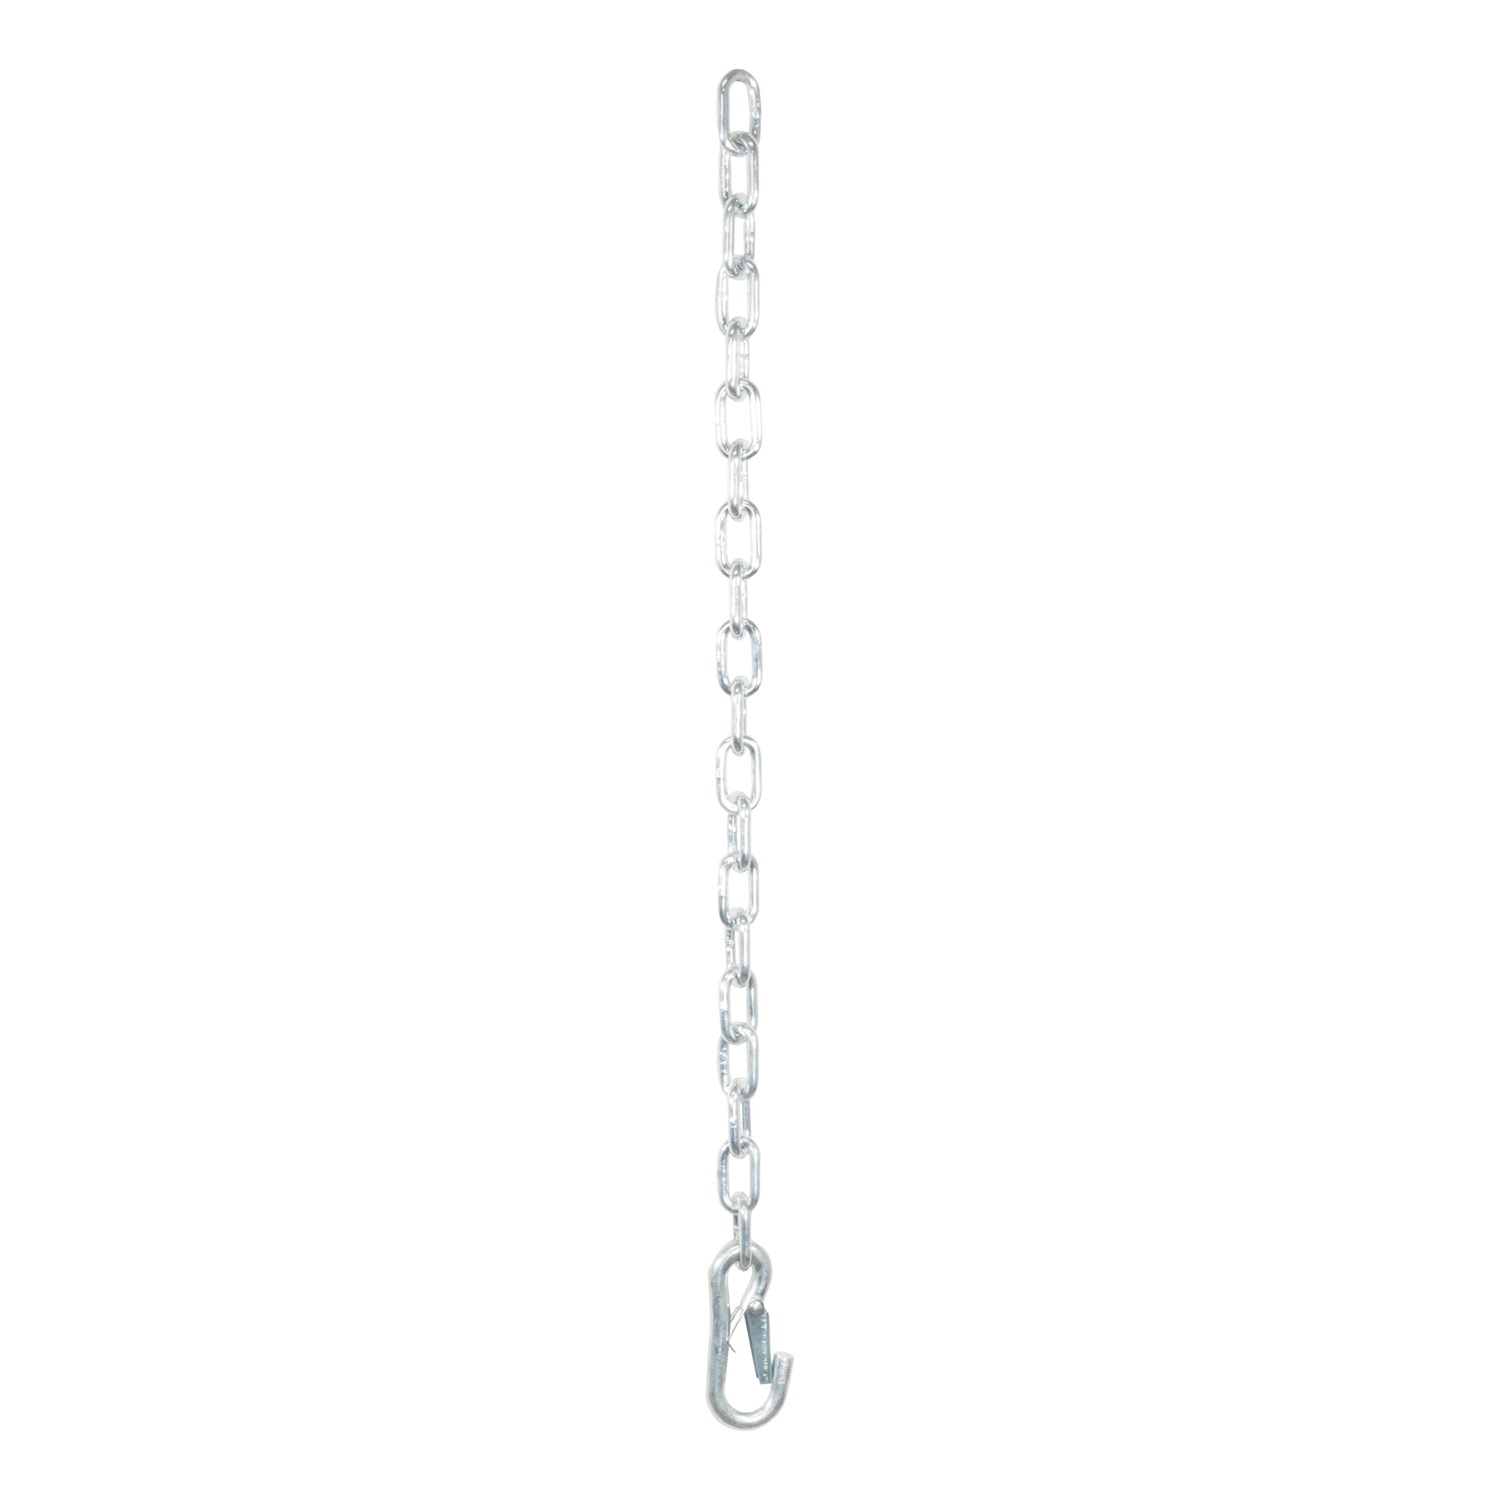 CURT Manufacturing CURT Manufacturing 80313 Safety Chain Assembly  Fits